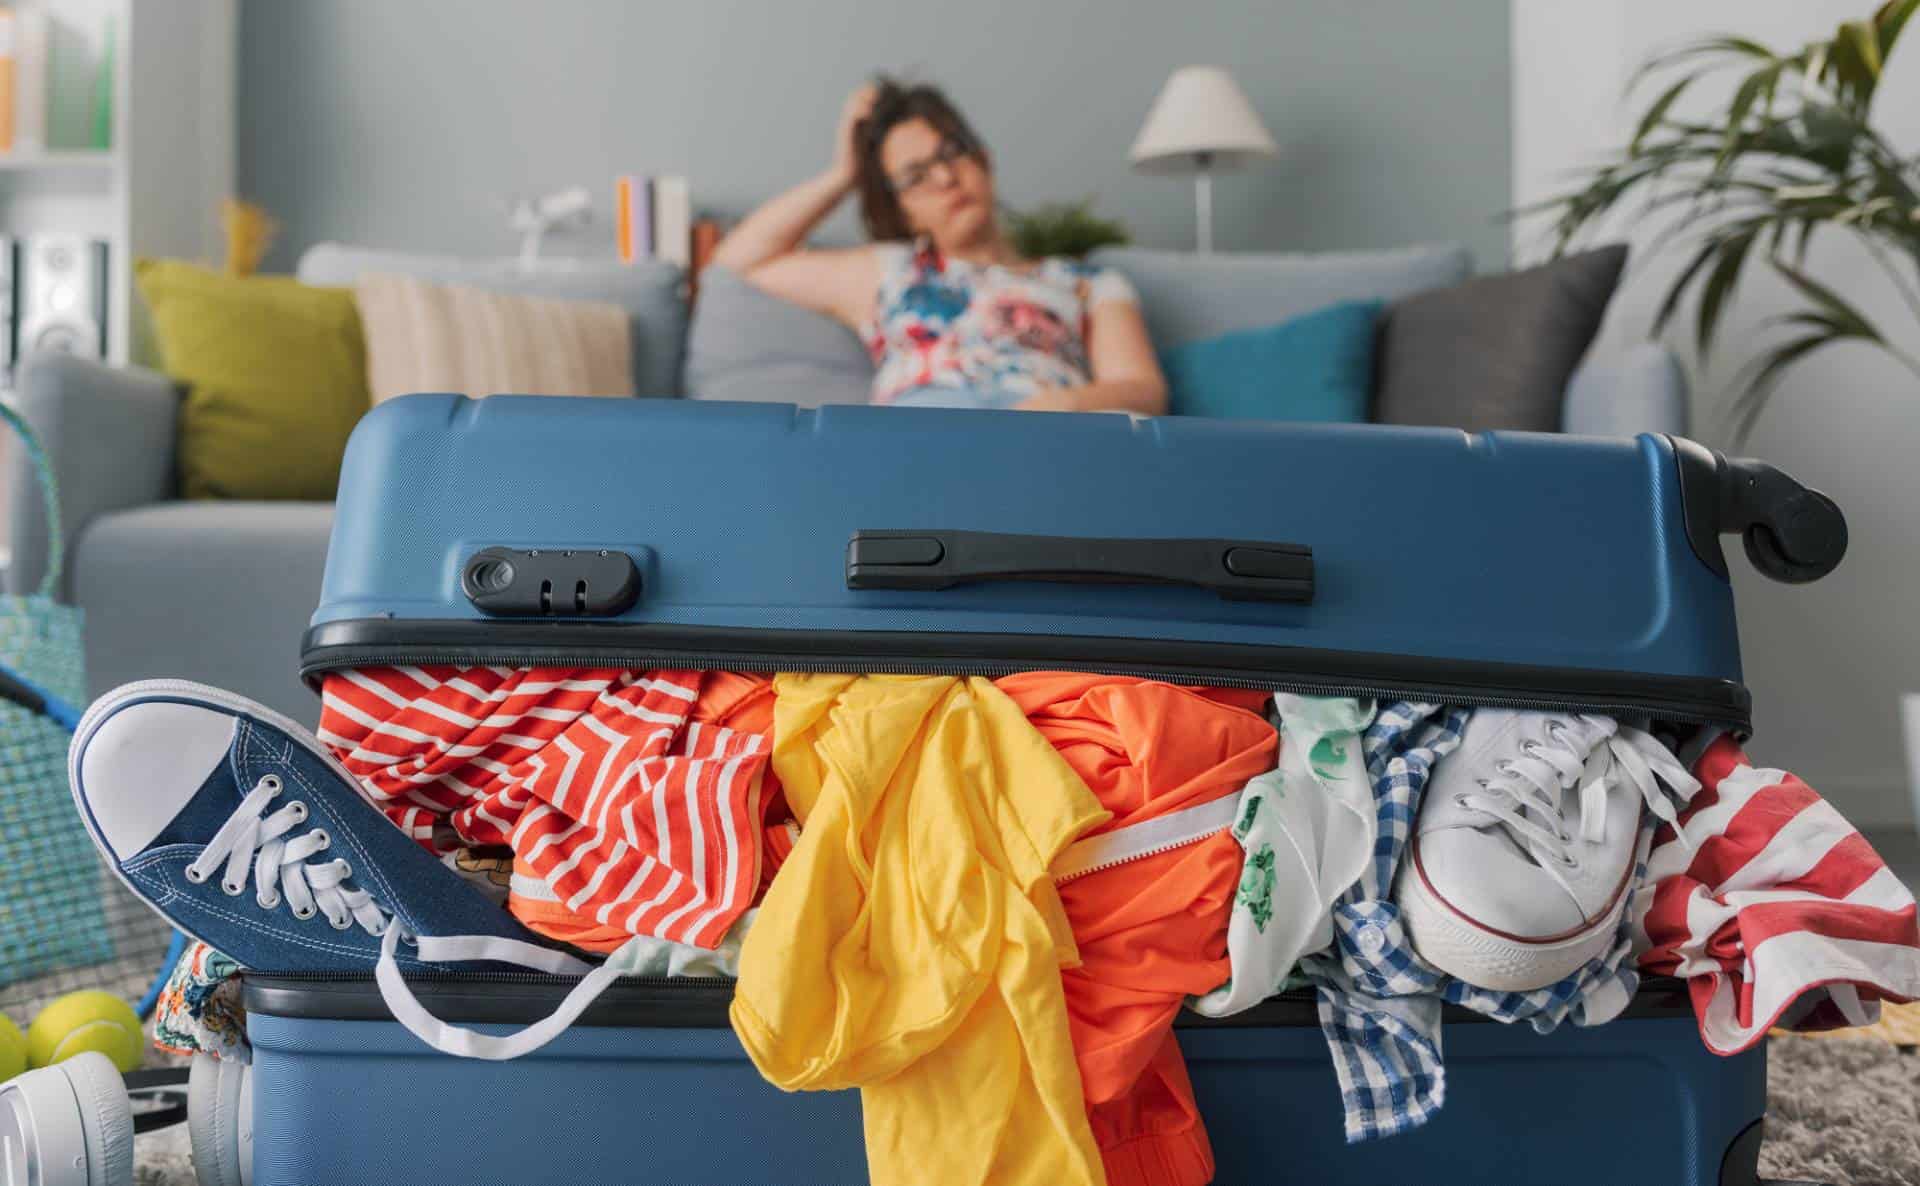 Stressed woman sitting on couch behind overpacked suitcase.